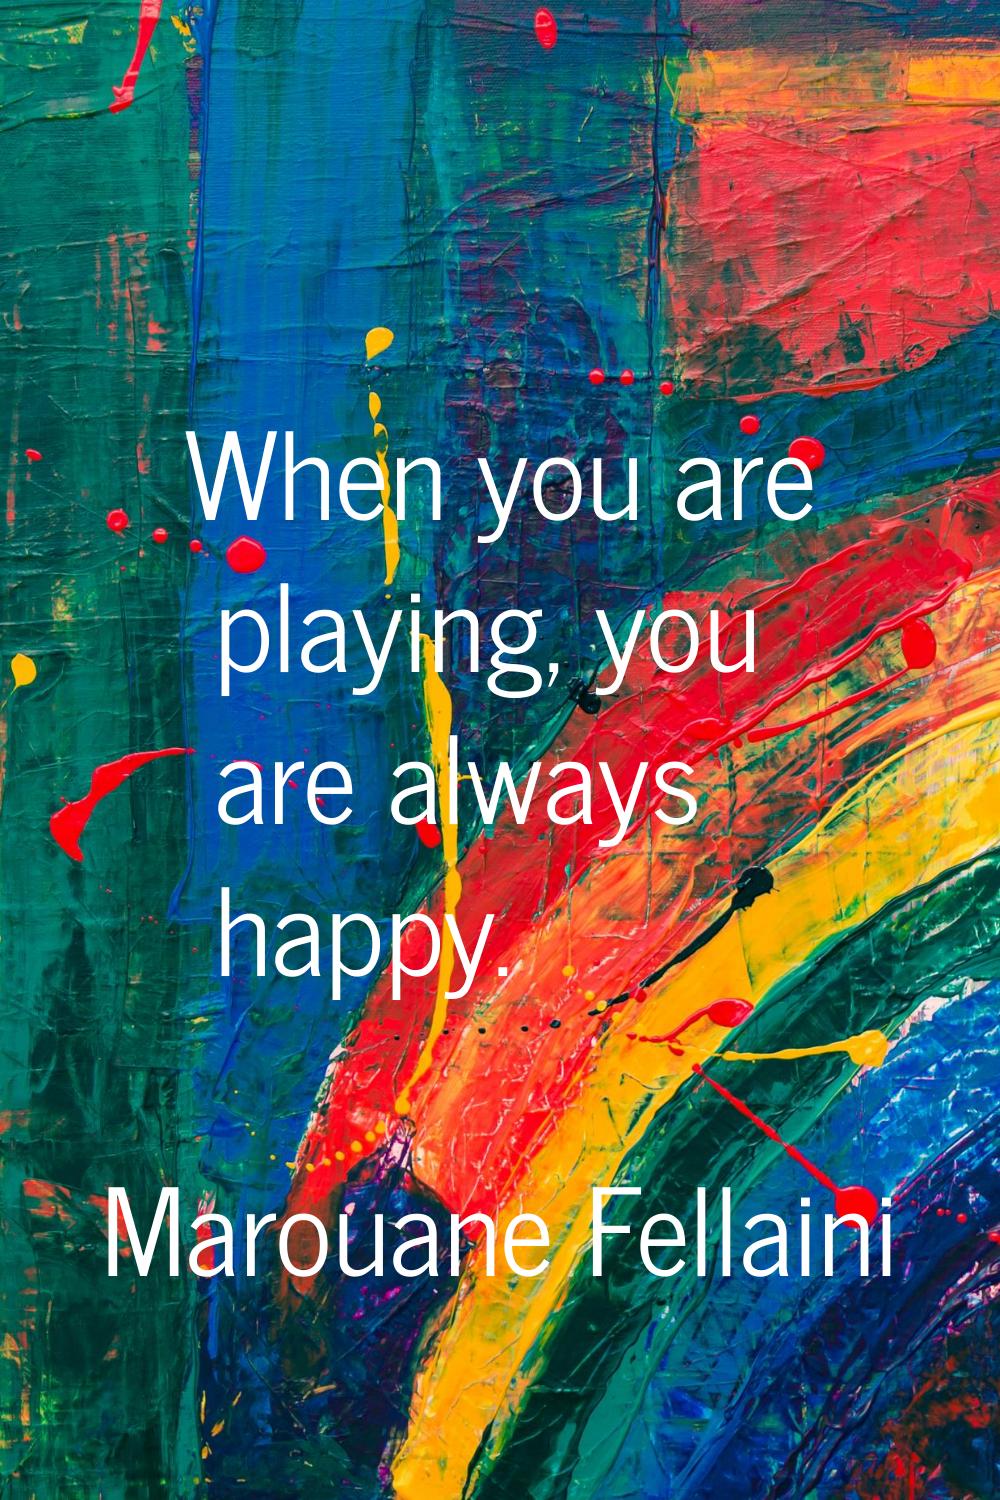 When you are playing, you are always happy.